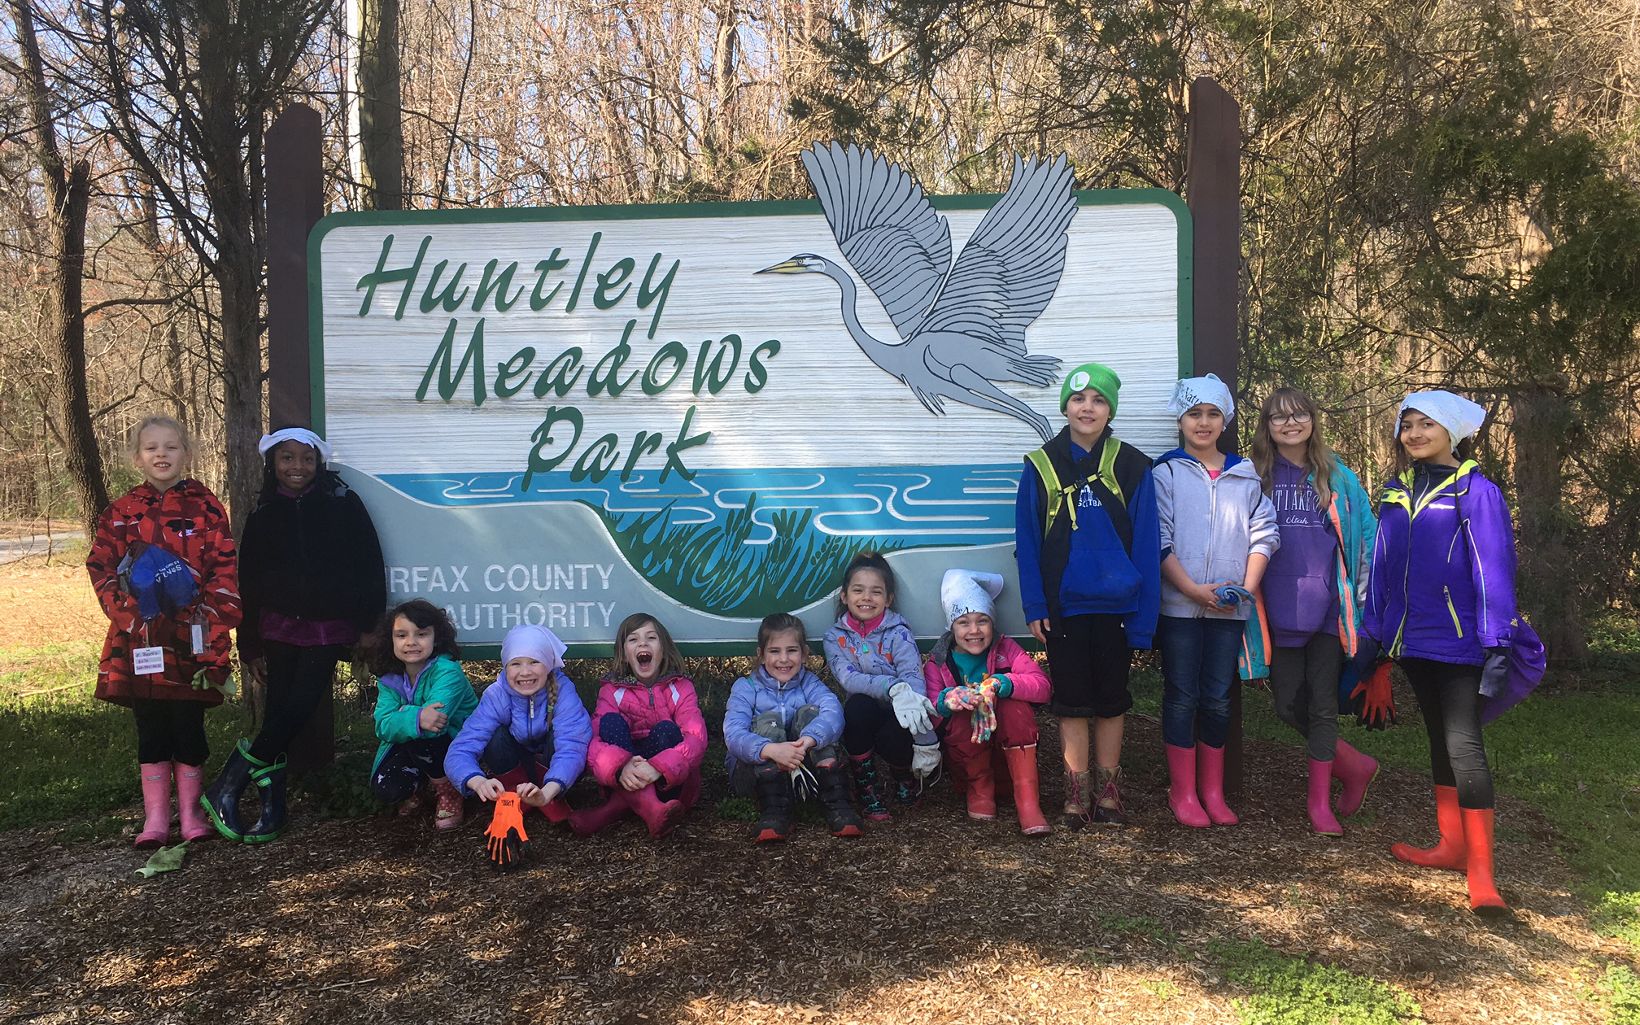 A smiling group of Brownie Scouts. Twelve girls lined up in front of a large sign reading "Huntley Meadows Park."